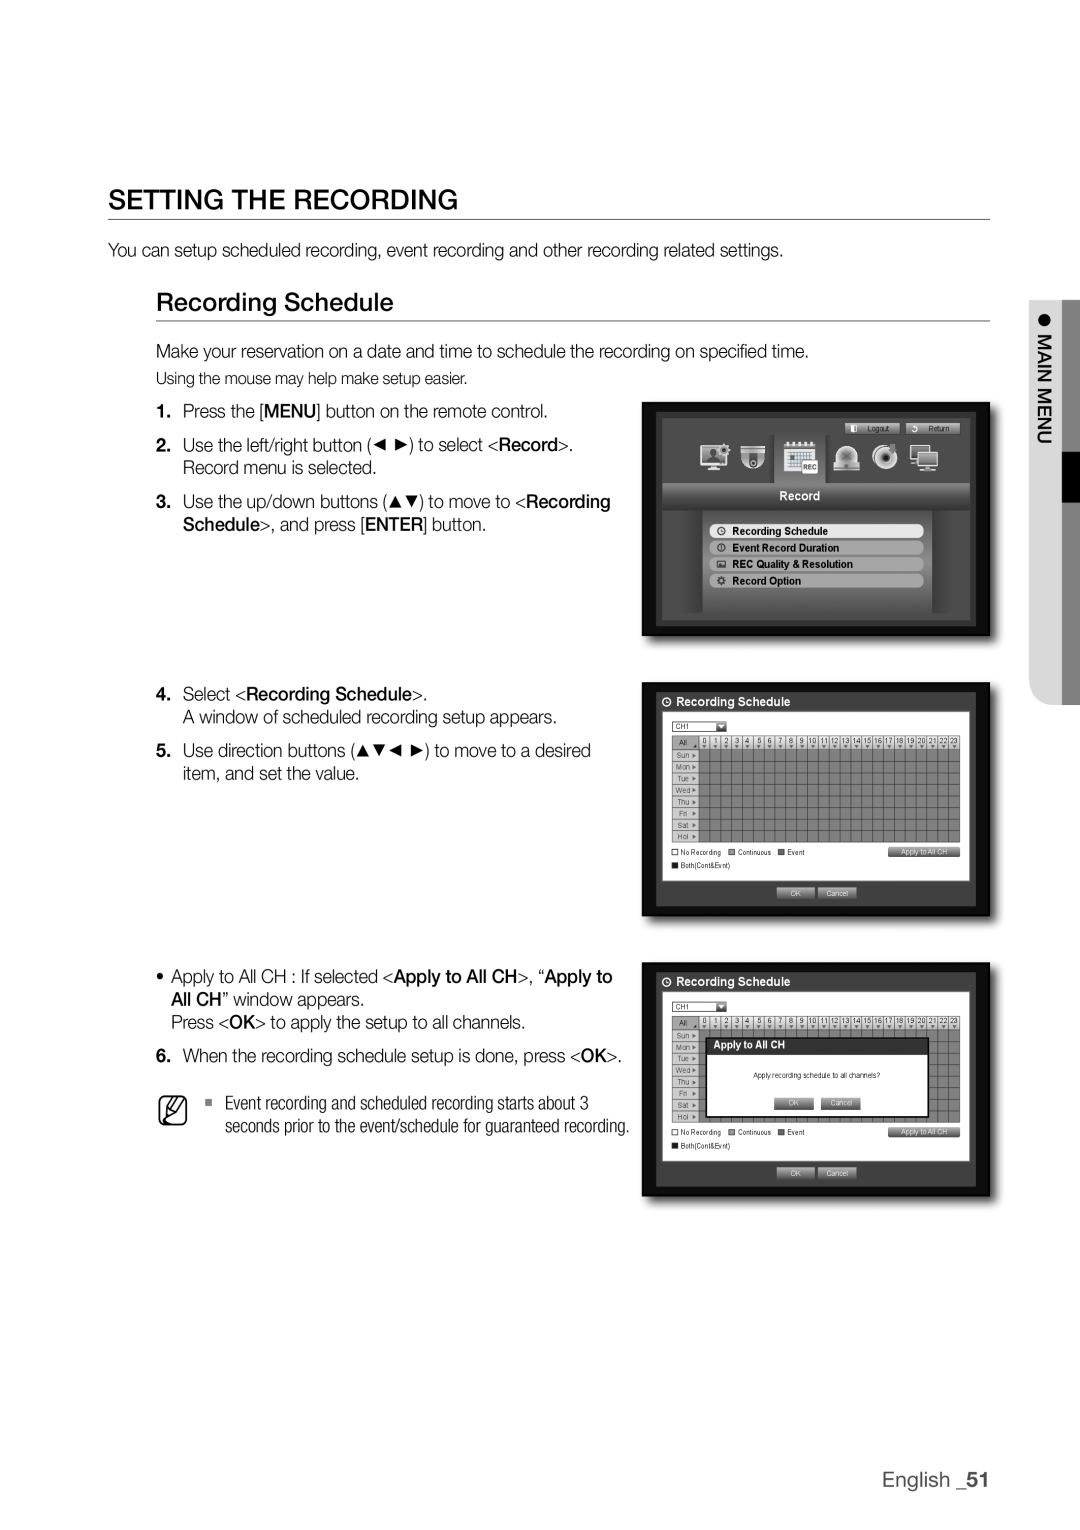 Samsung SDR3100 user manual SeTTinG THe ReCORDinG, Recording Schedule, English _51 